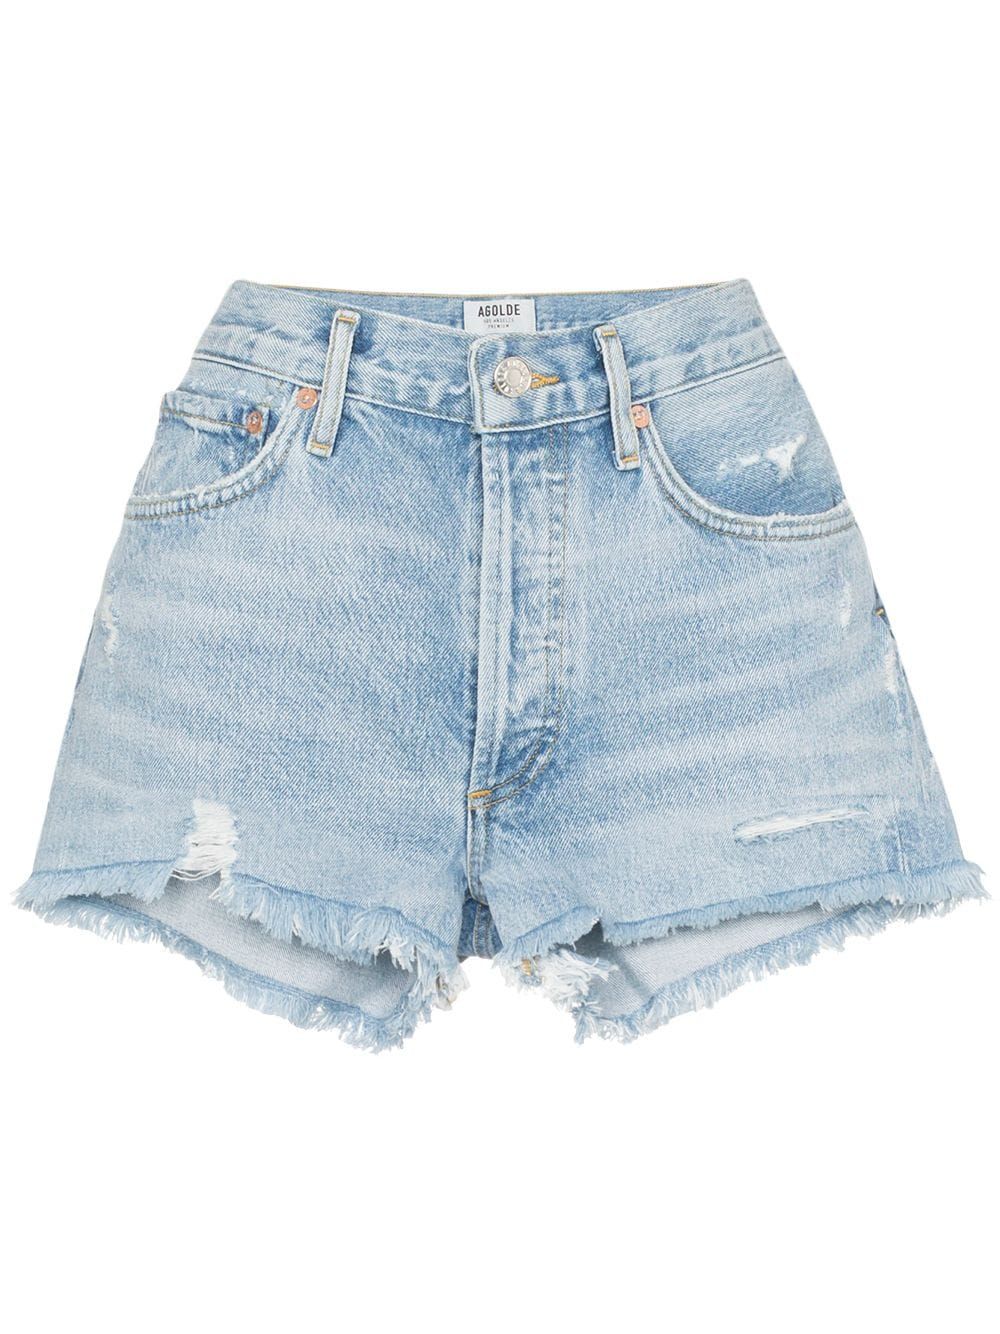 The Ultimate Guide to Styling Blue Jean
Shorts